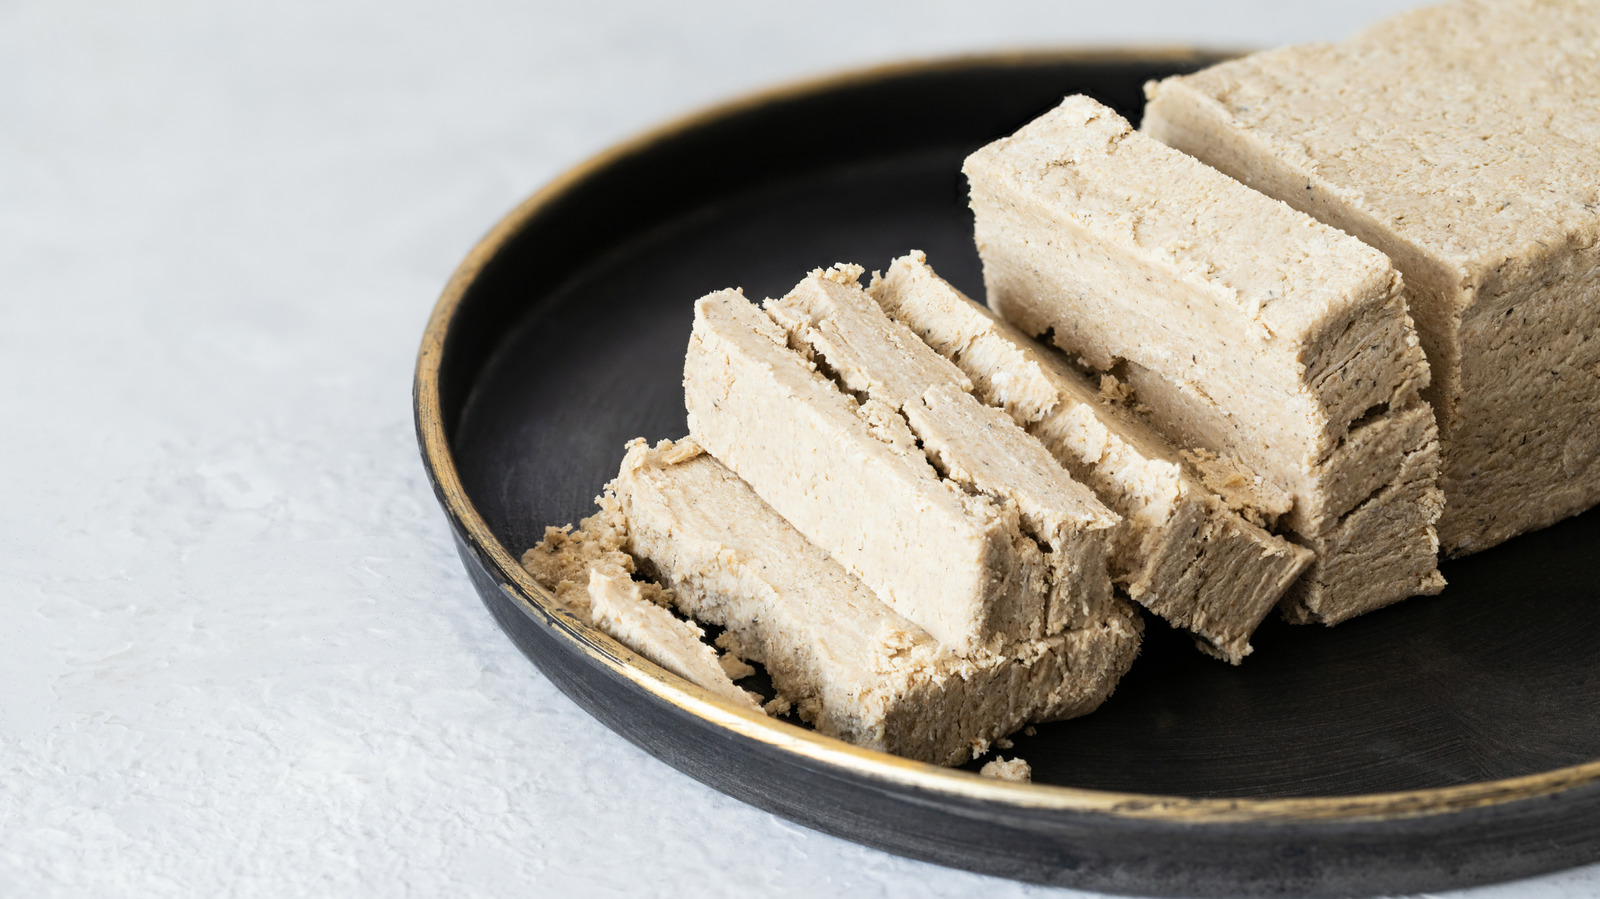 What Is Halva And What Does It Taste Like?